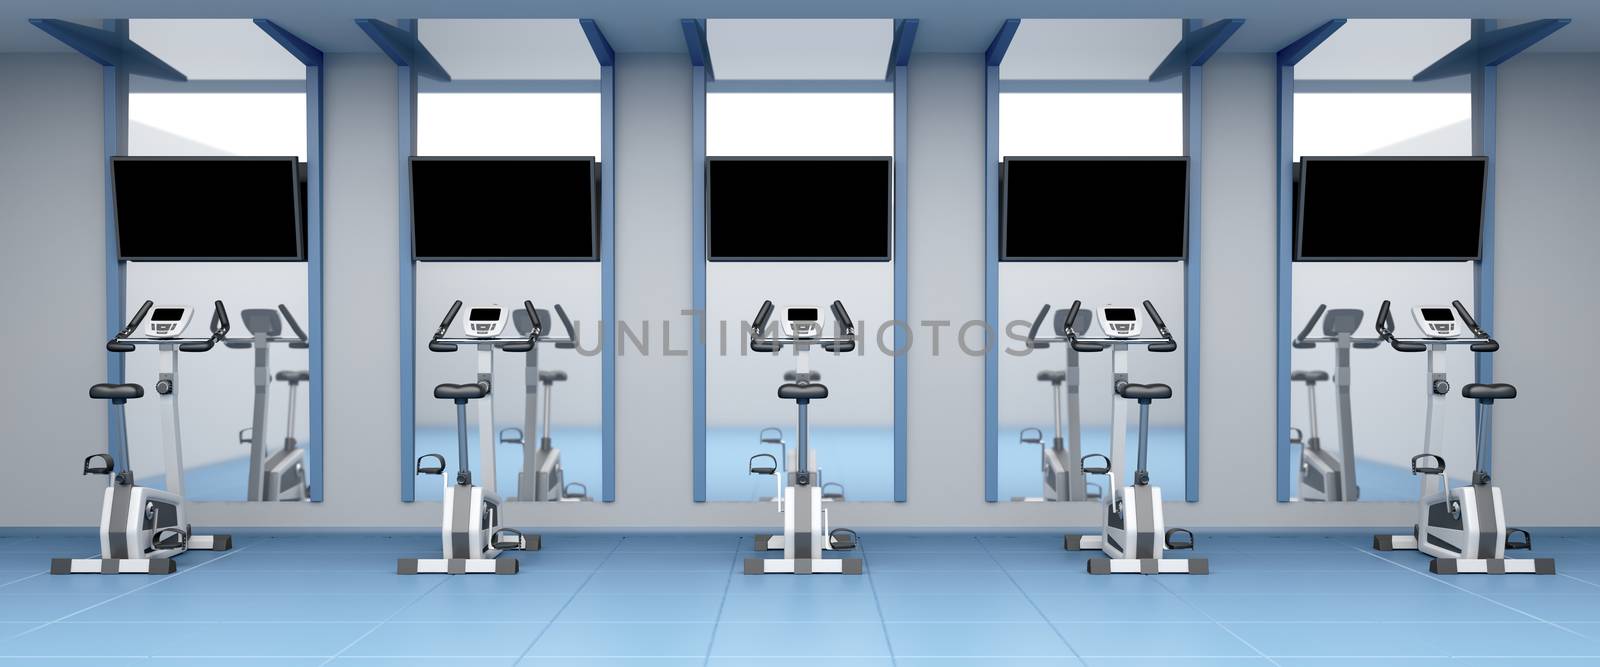 Stationary bicycles in gym by magraphics